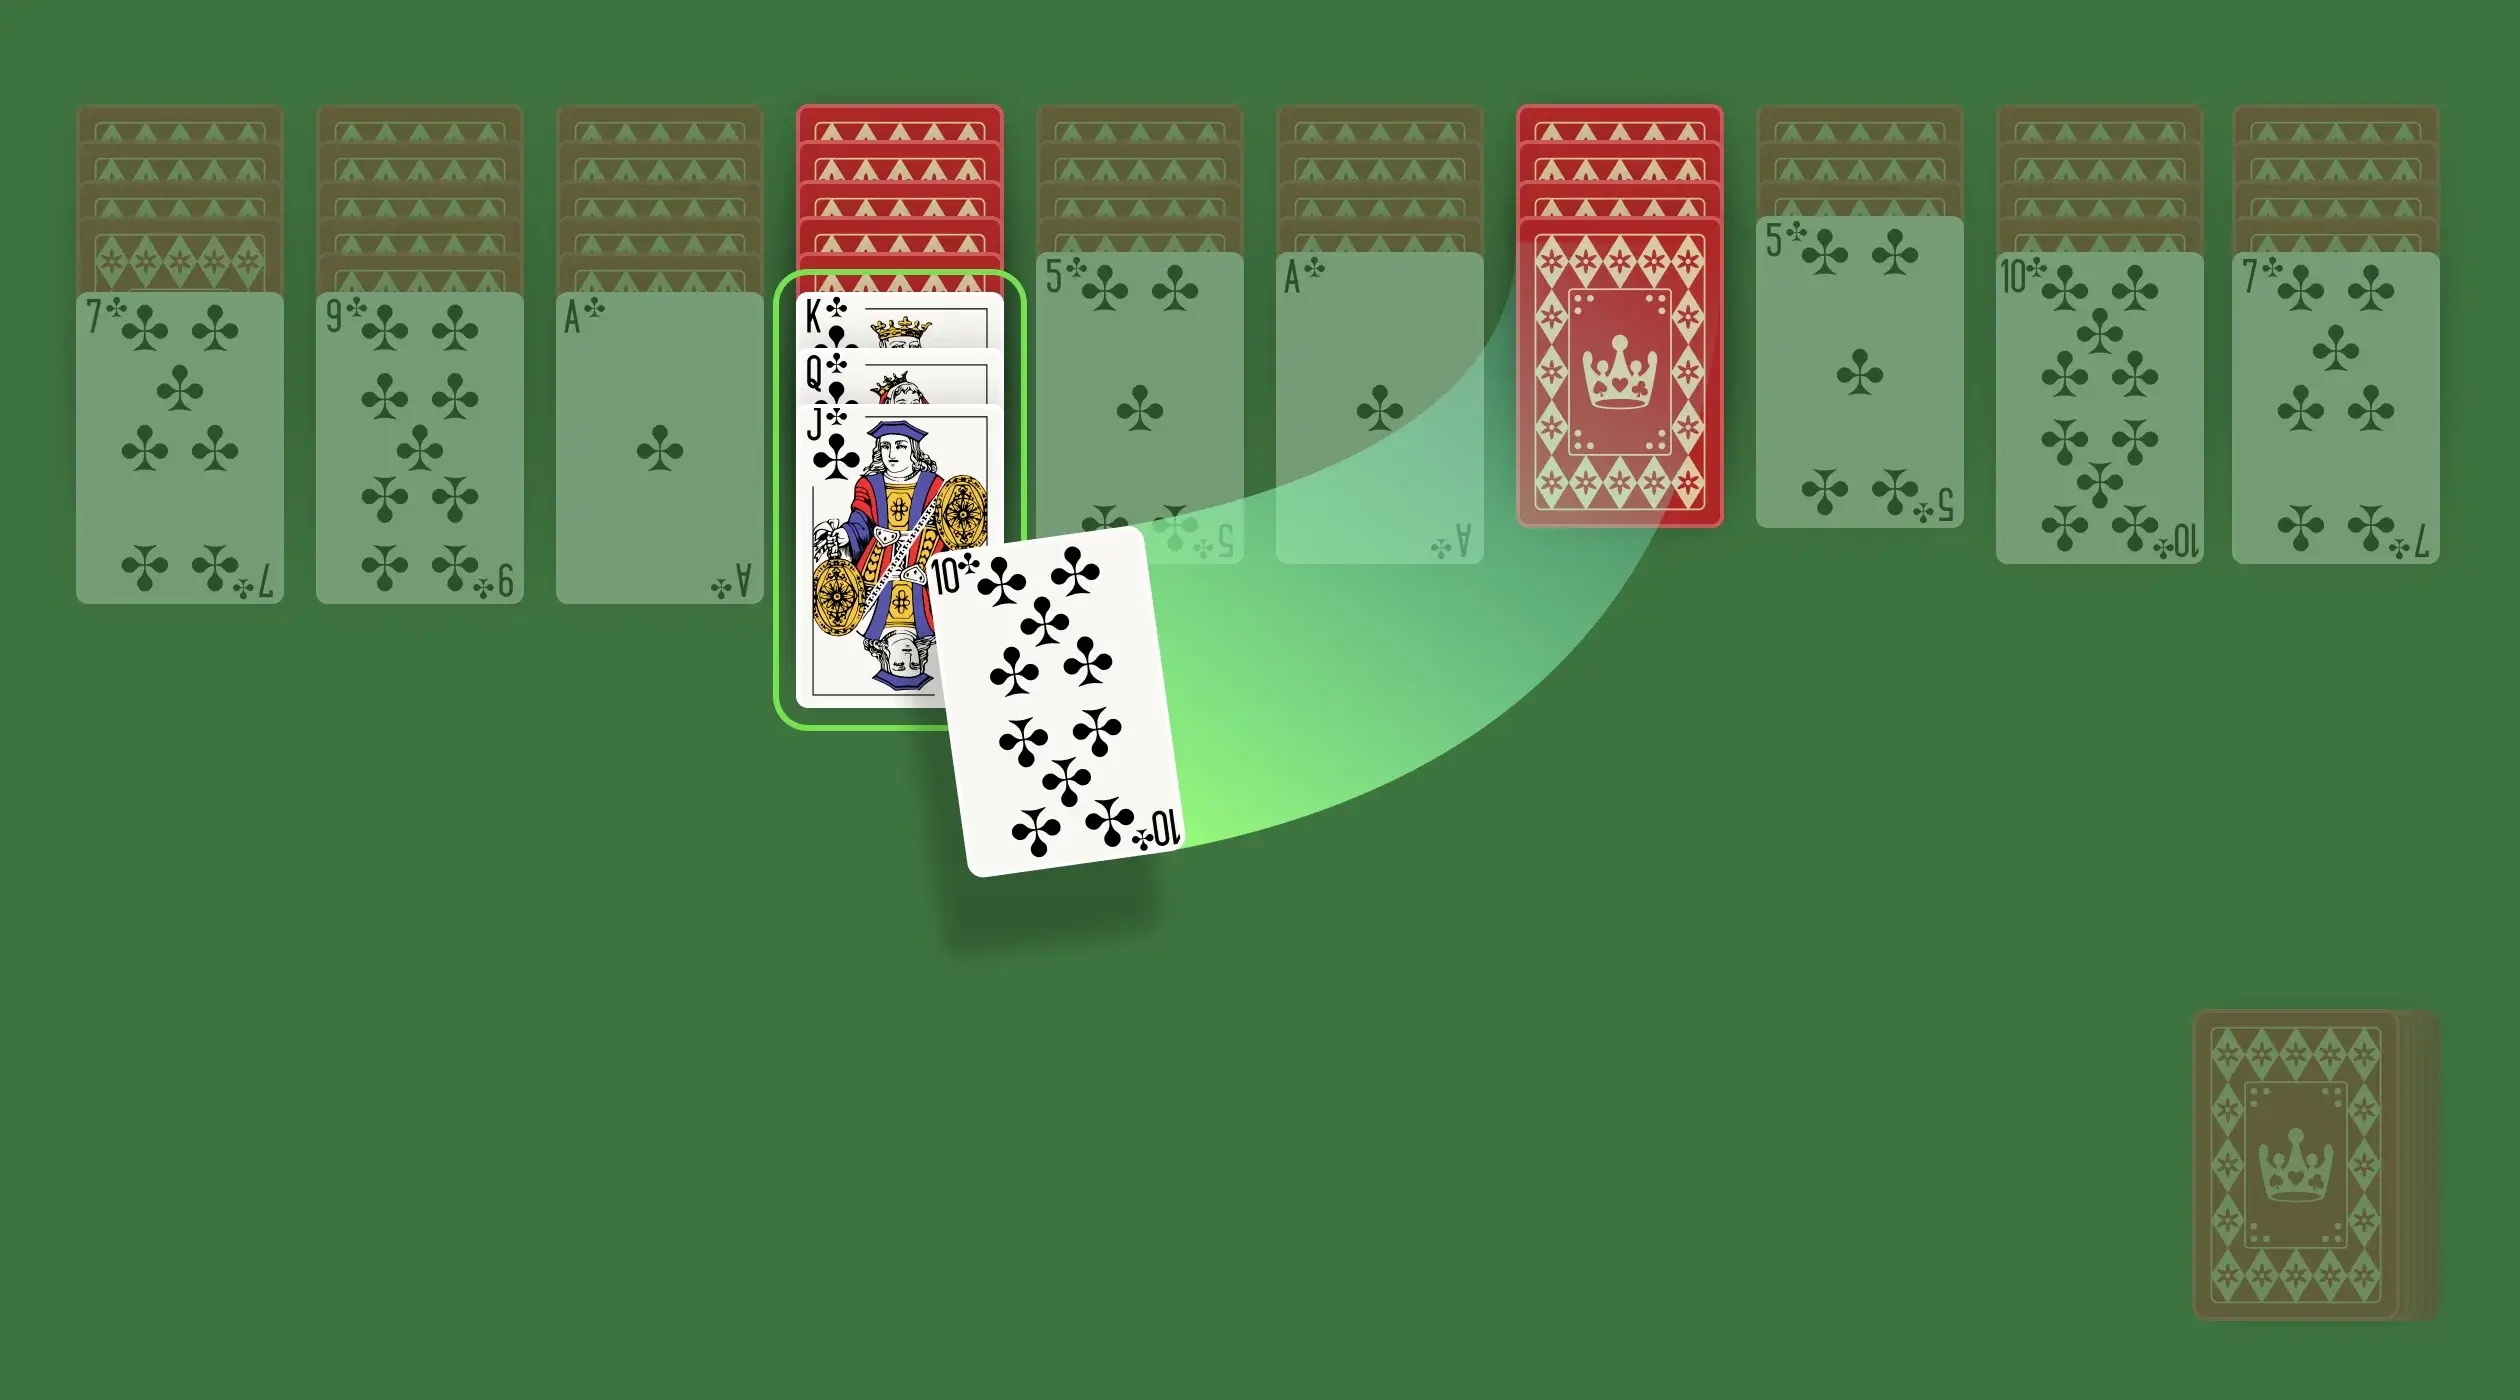 Your mission is to organize cards in descending order from King to Ace in their respective suits. However, you can move cards between columns irrespective of their suit as long as the destination card is one rank higher. Don’t worry. You can even move multiple cards in their numerical sequence to other columns.